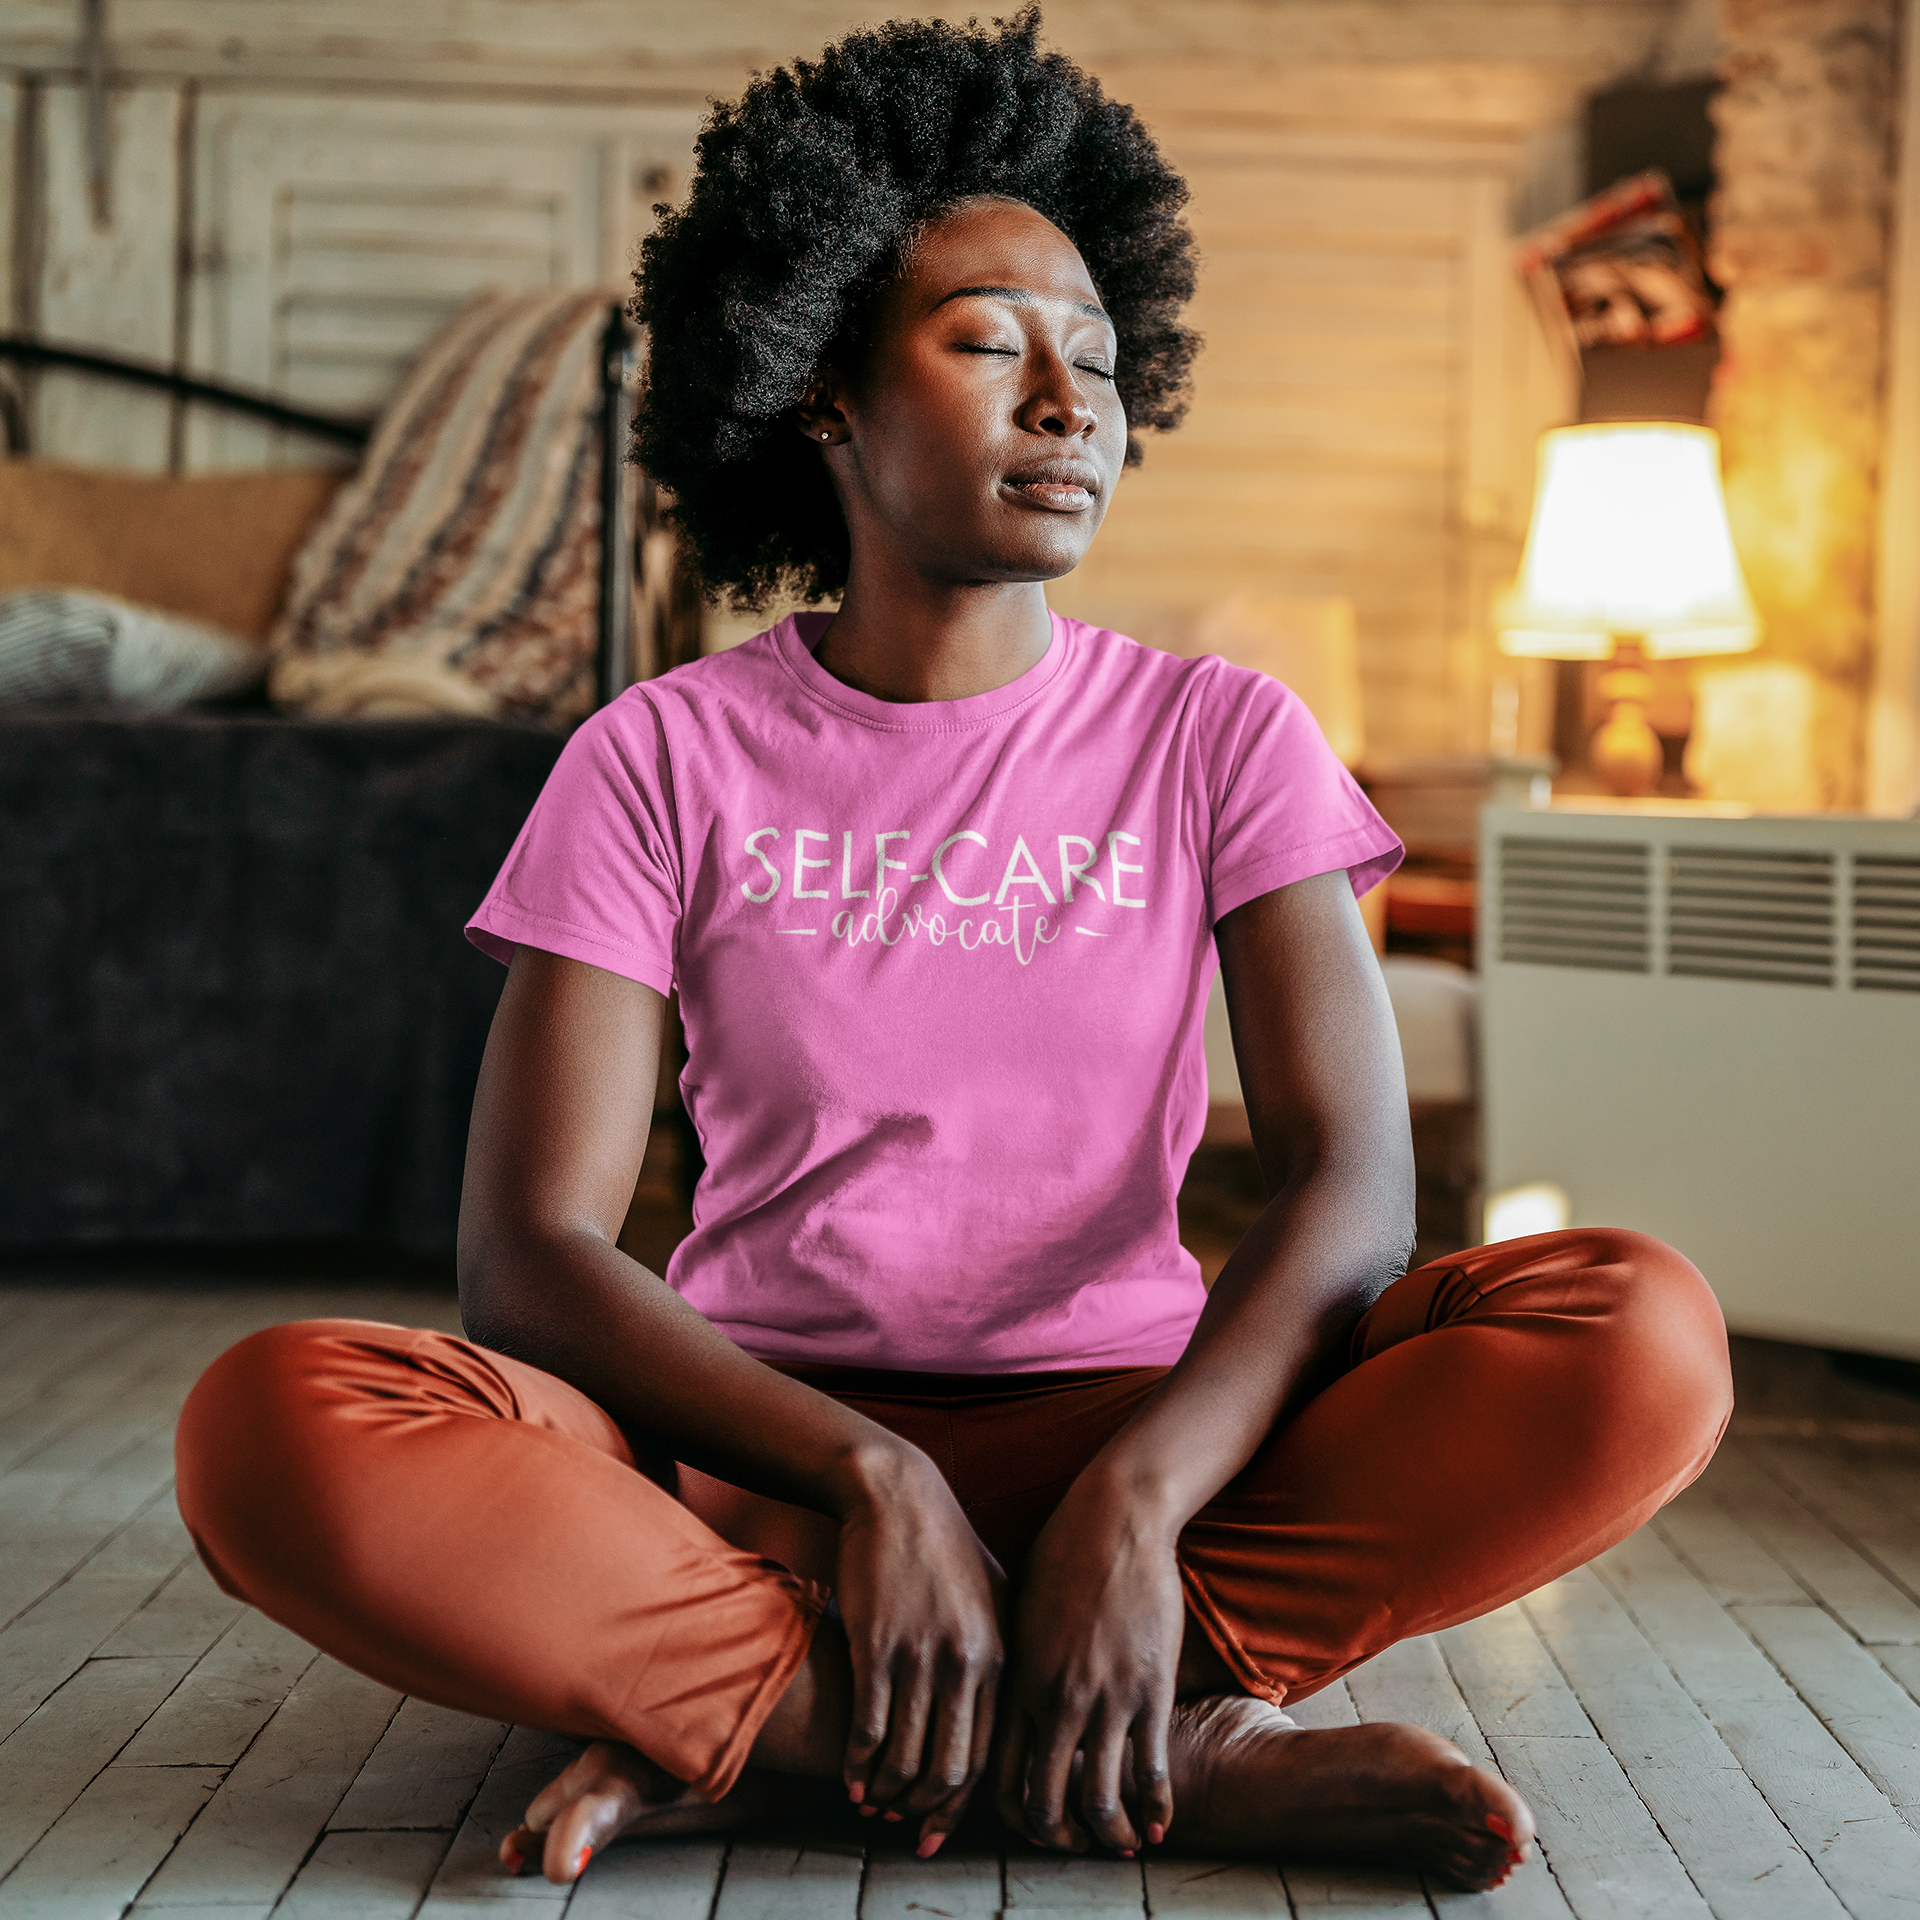 A woman sitting on the floor wearing the Self-Care Advocate Tee by Sharp Tact Kreativ | Tees & Gifts with Encouraging Messages to Brighten Your Day with a Bit of Wit.